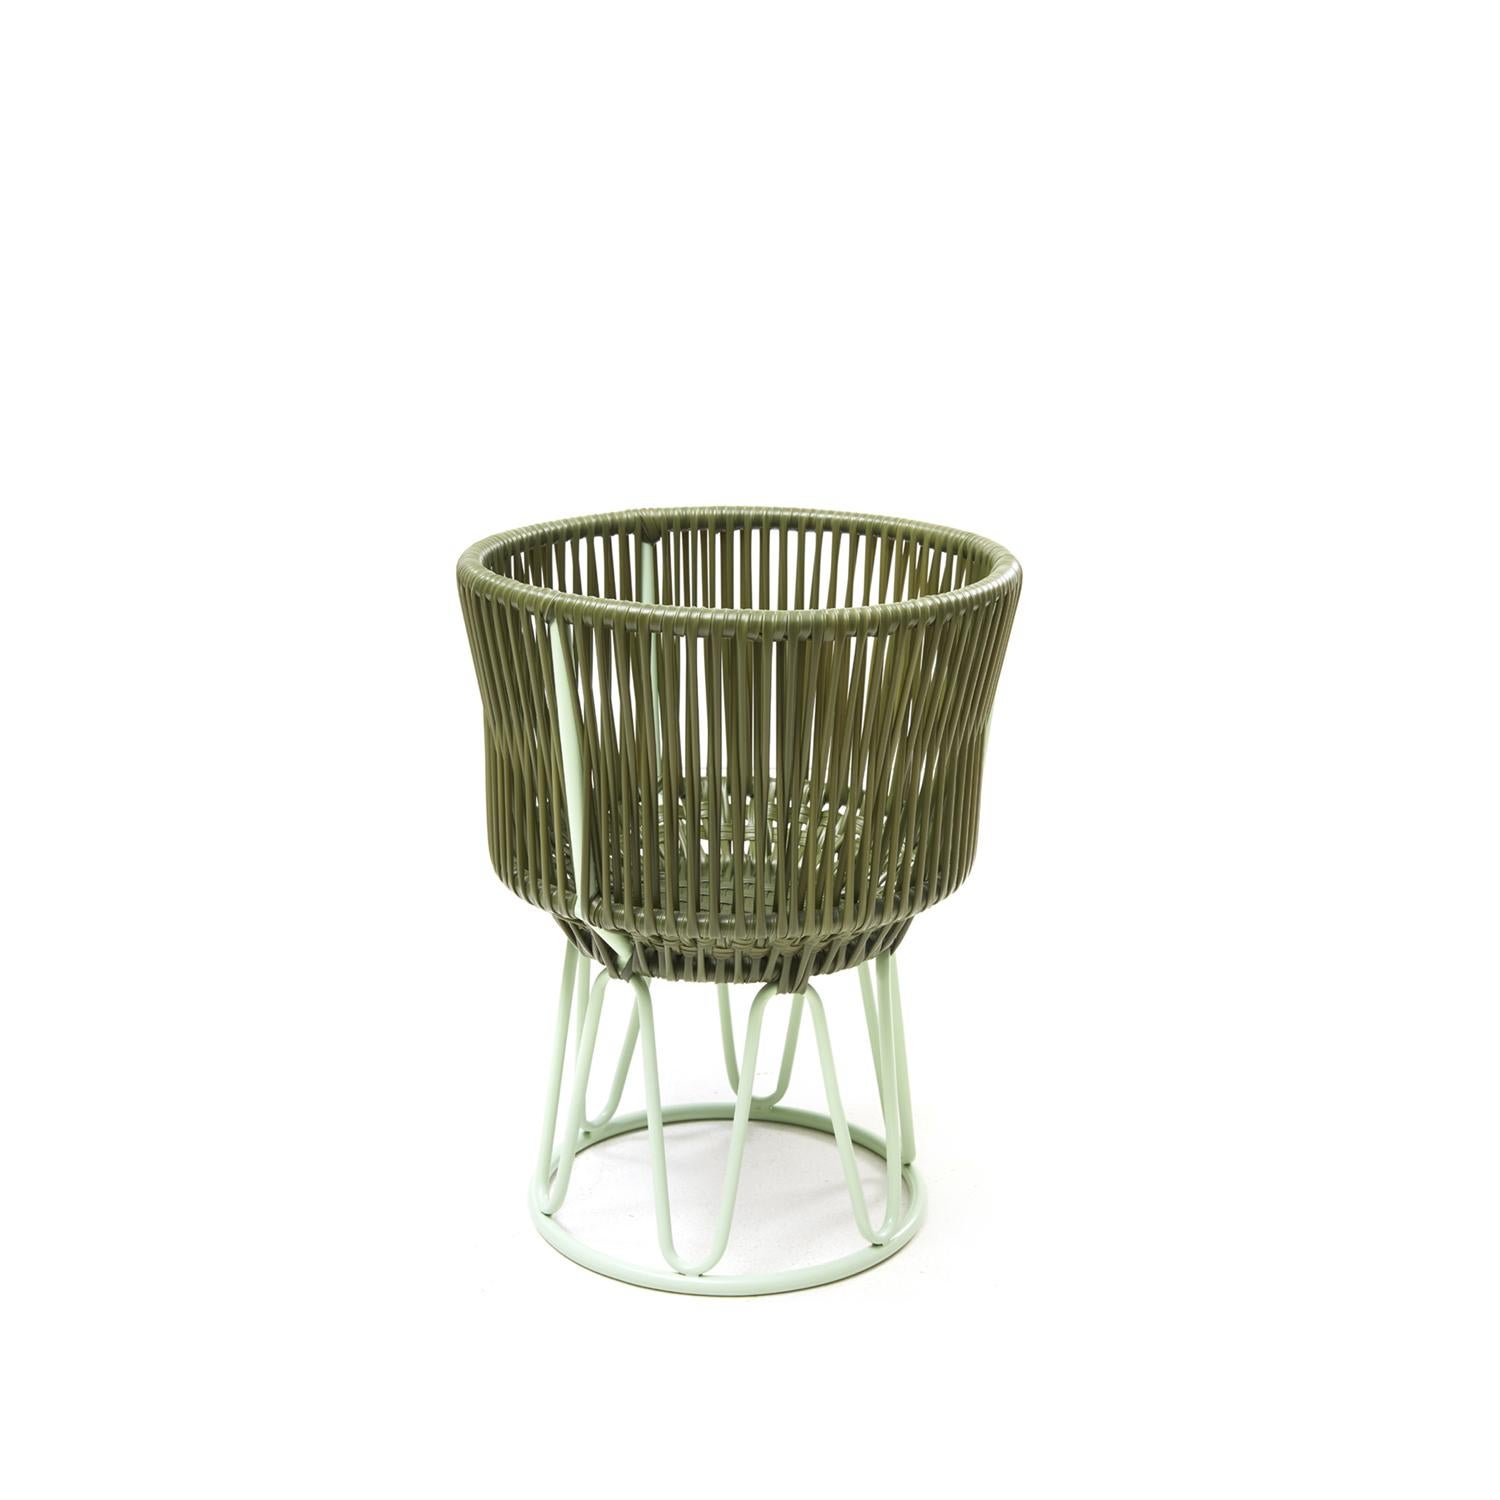 Olive Circo Flower pot 1 by Sebastian Herkner
Materials: Galvanized and powder-coated tubular steel. PVC strings.
Technique: Made from recycled plastic. Weaved by local craftspeople in Colombia. 
Dimensions: 
Top diameter 36 x height 48 cm